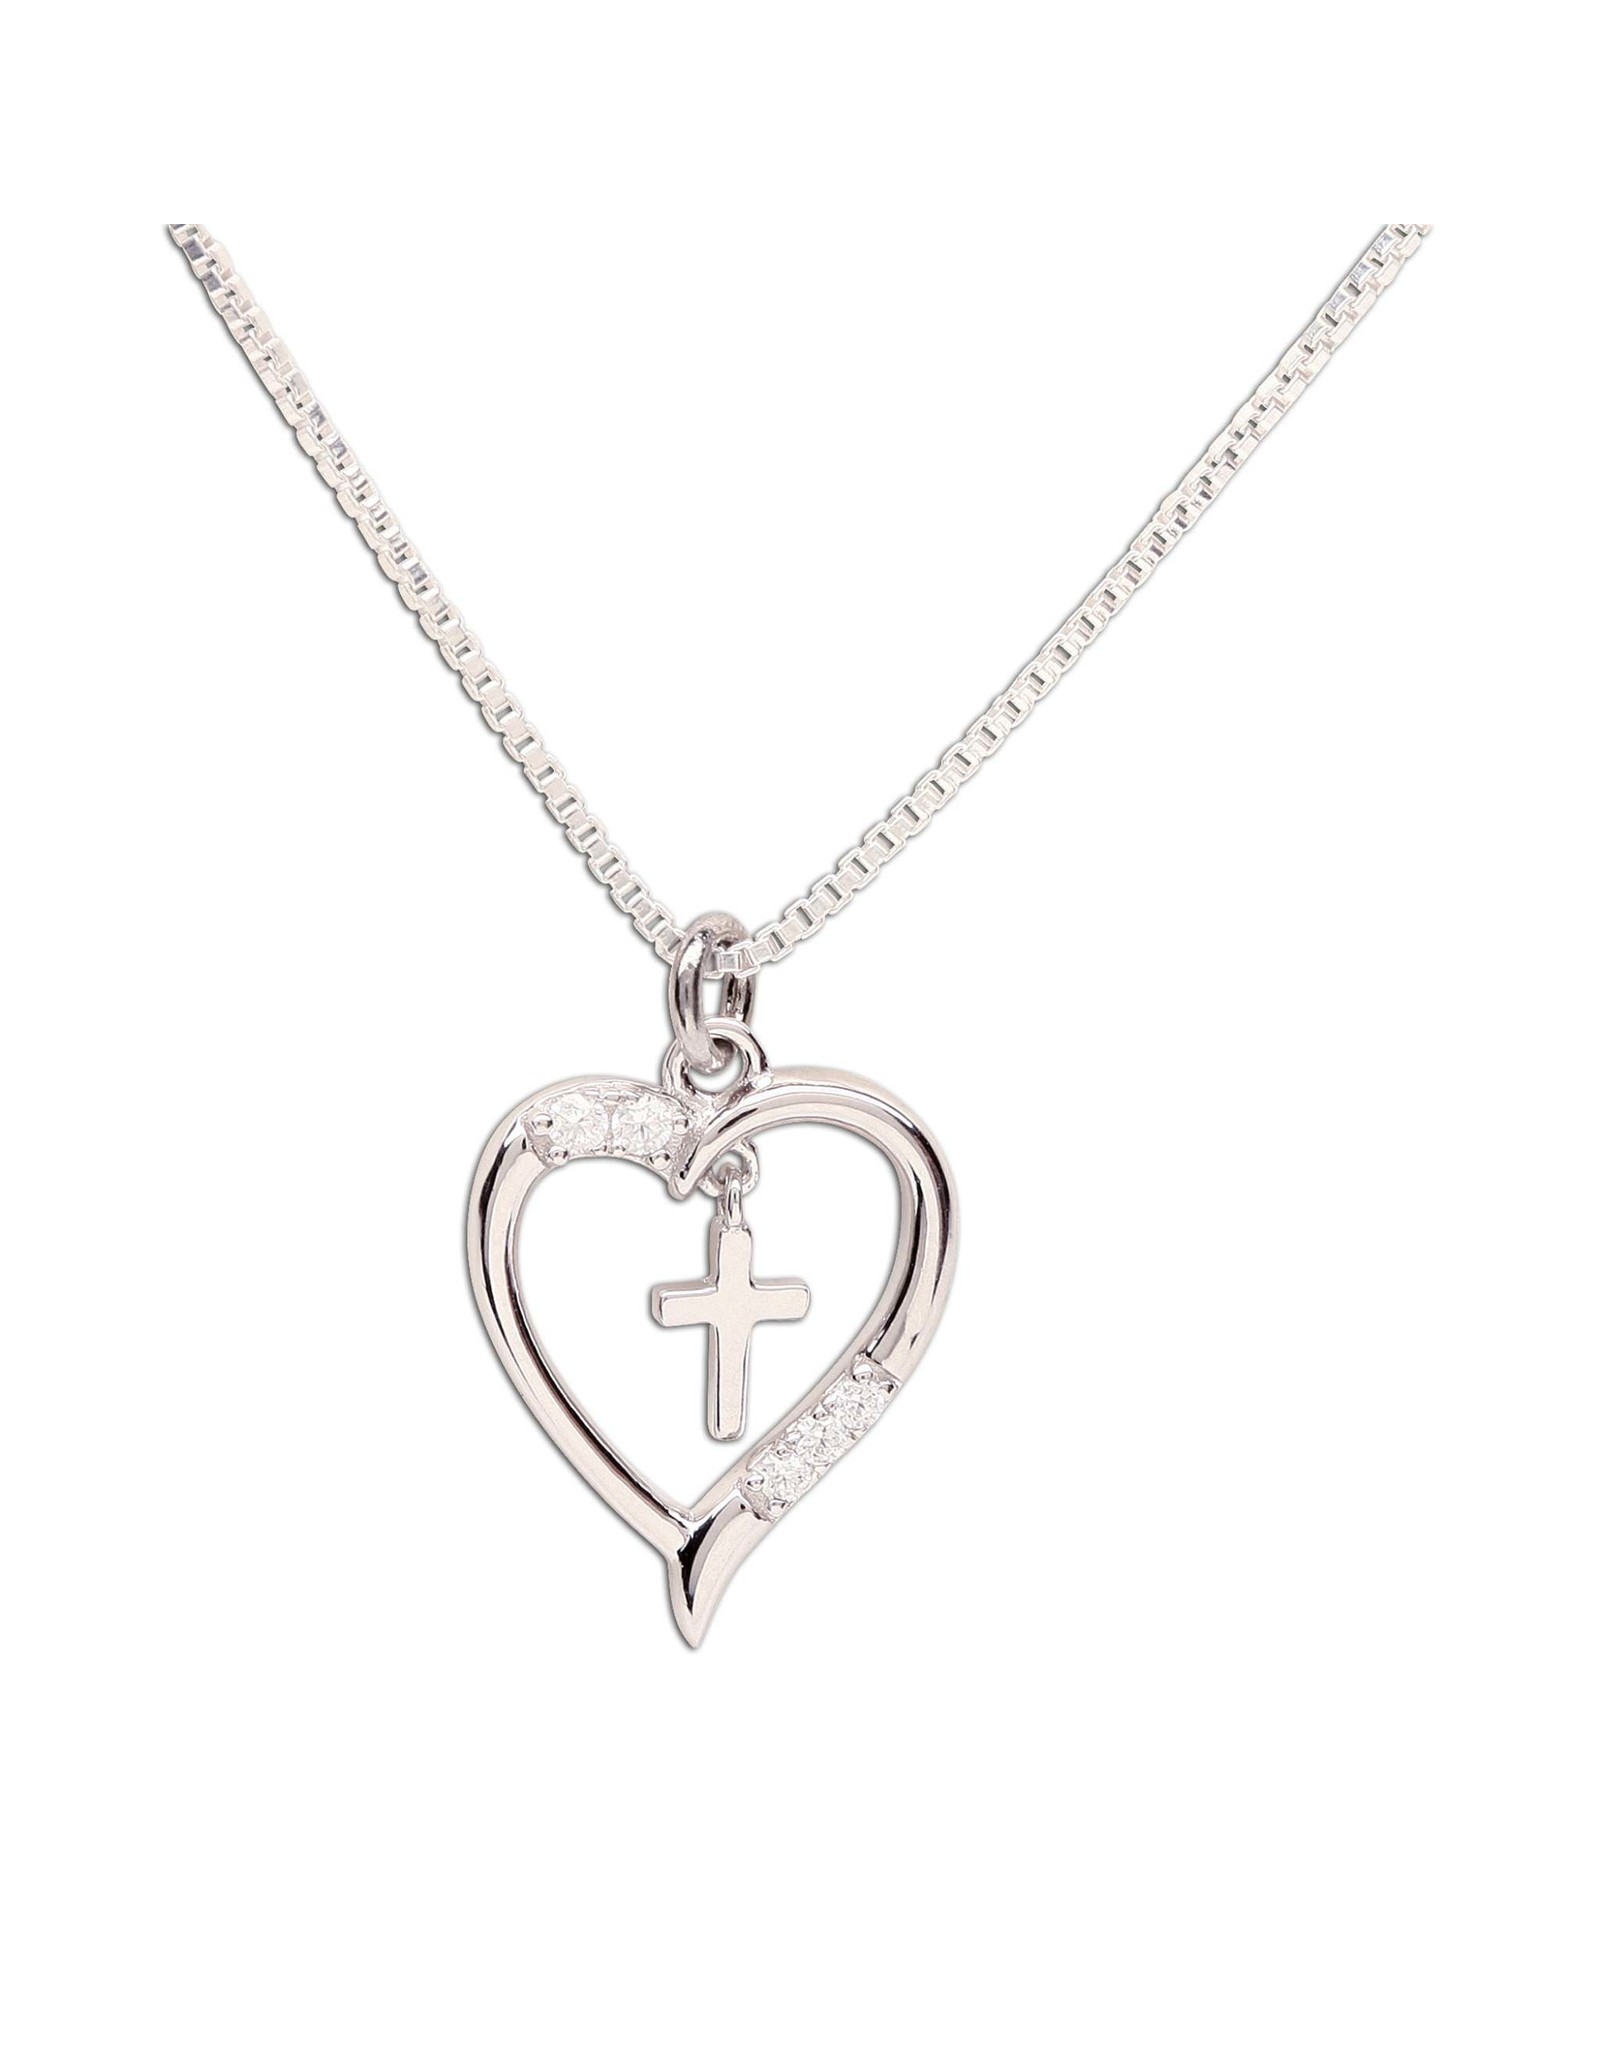 Cherished Moments Sterling Silver Dancing Cross Heart Necklace on 14" Chain